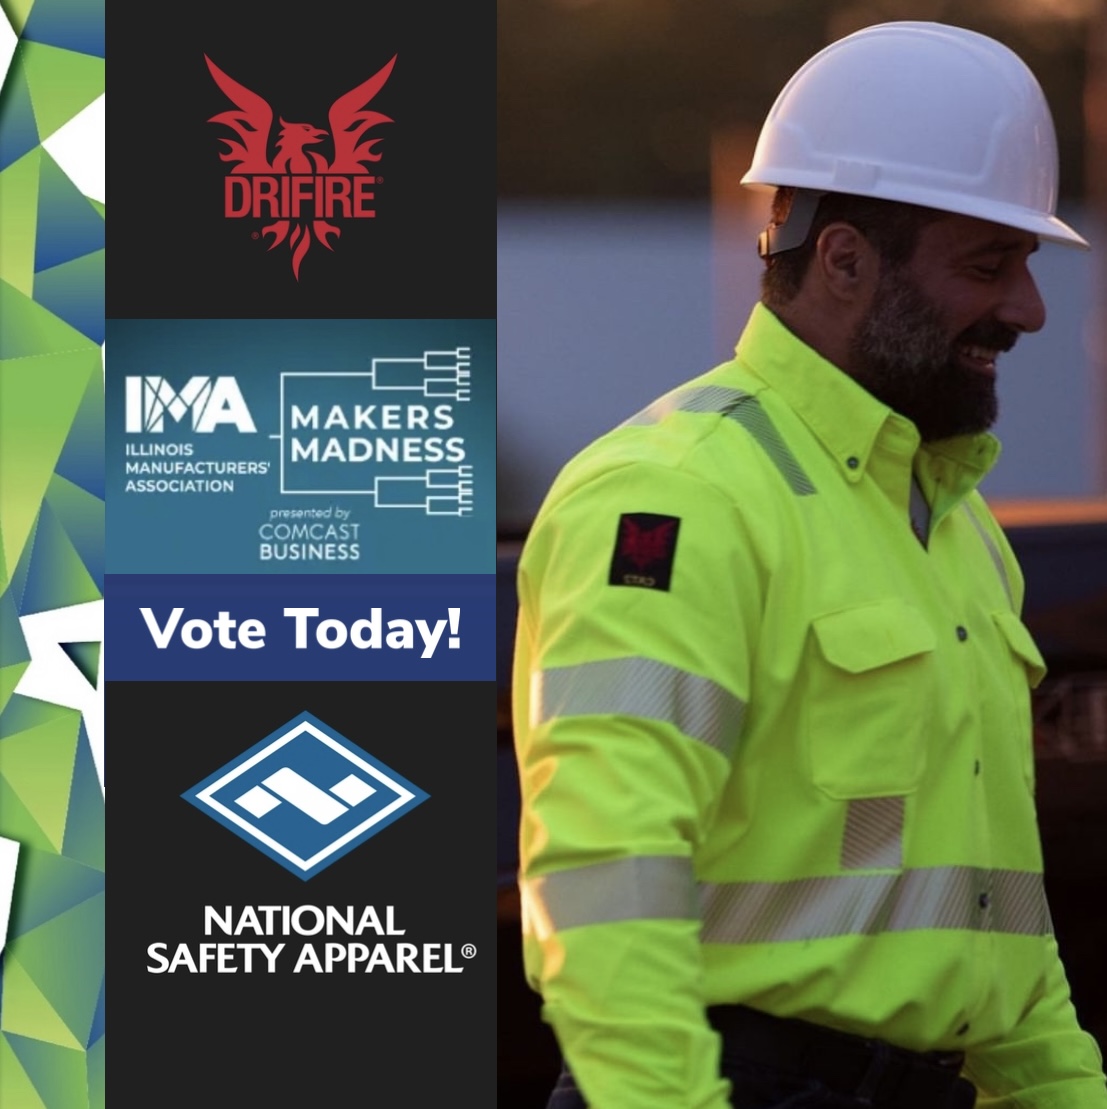 Don’t forget to vote for the product that brings you home safely every day for The Coolest Thing Made in Illinois!  Visit makersmadnessil.com and VOTE (up to 5x’s each day) for DRIFIRE Hi-Vis FR Work Wear to advance to the Top 16! #MakersMadnessIL